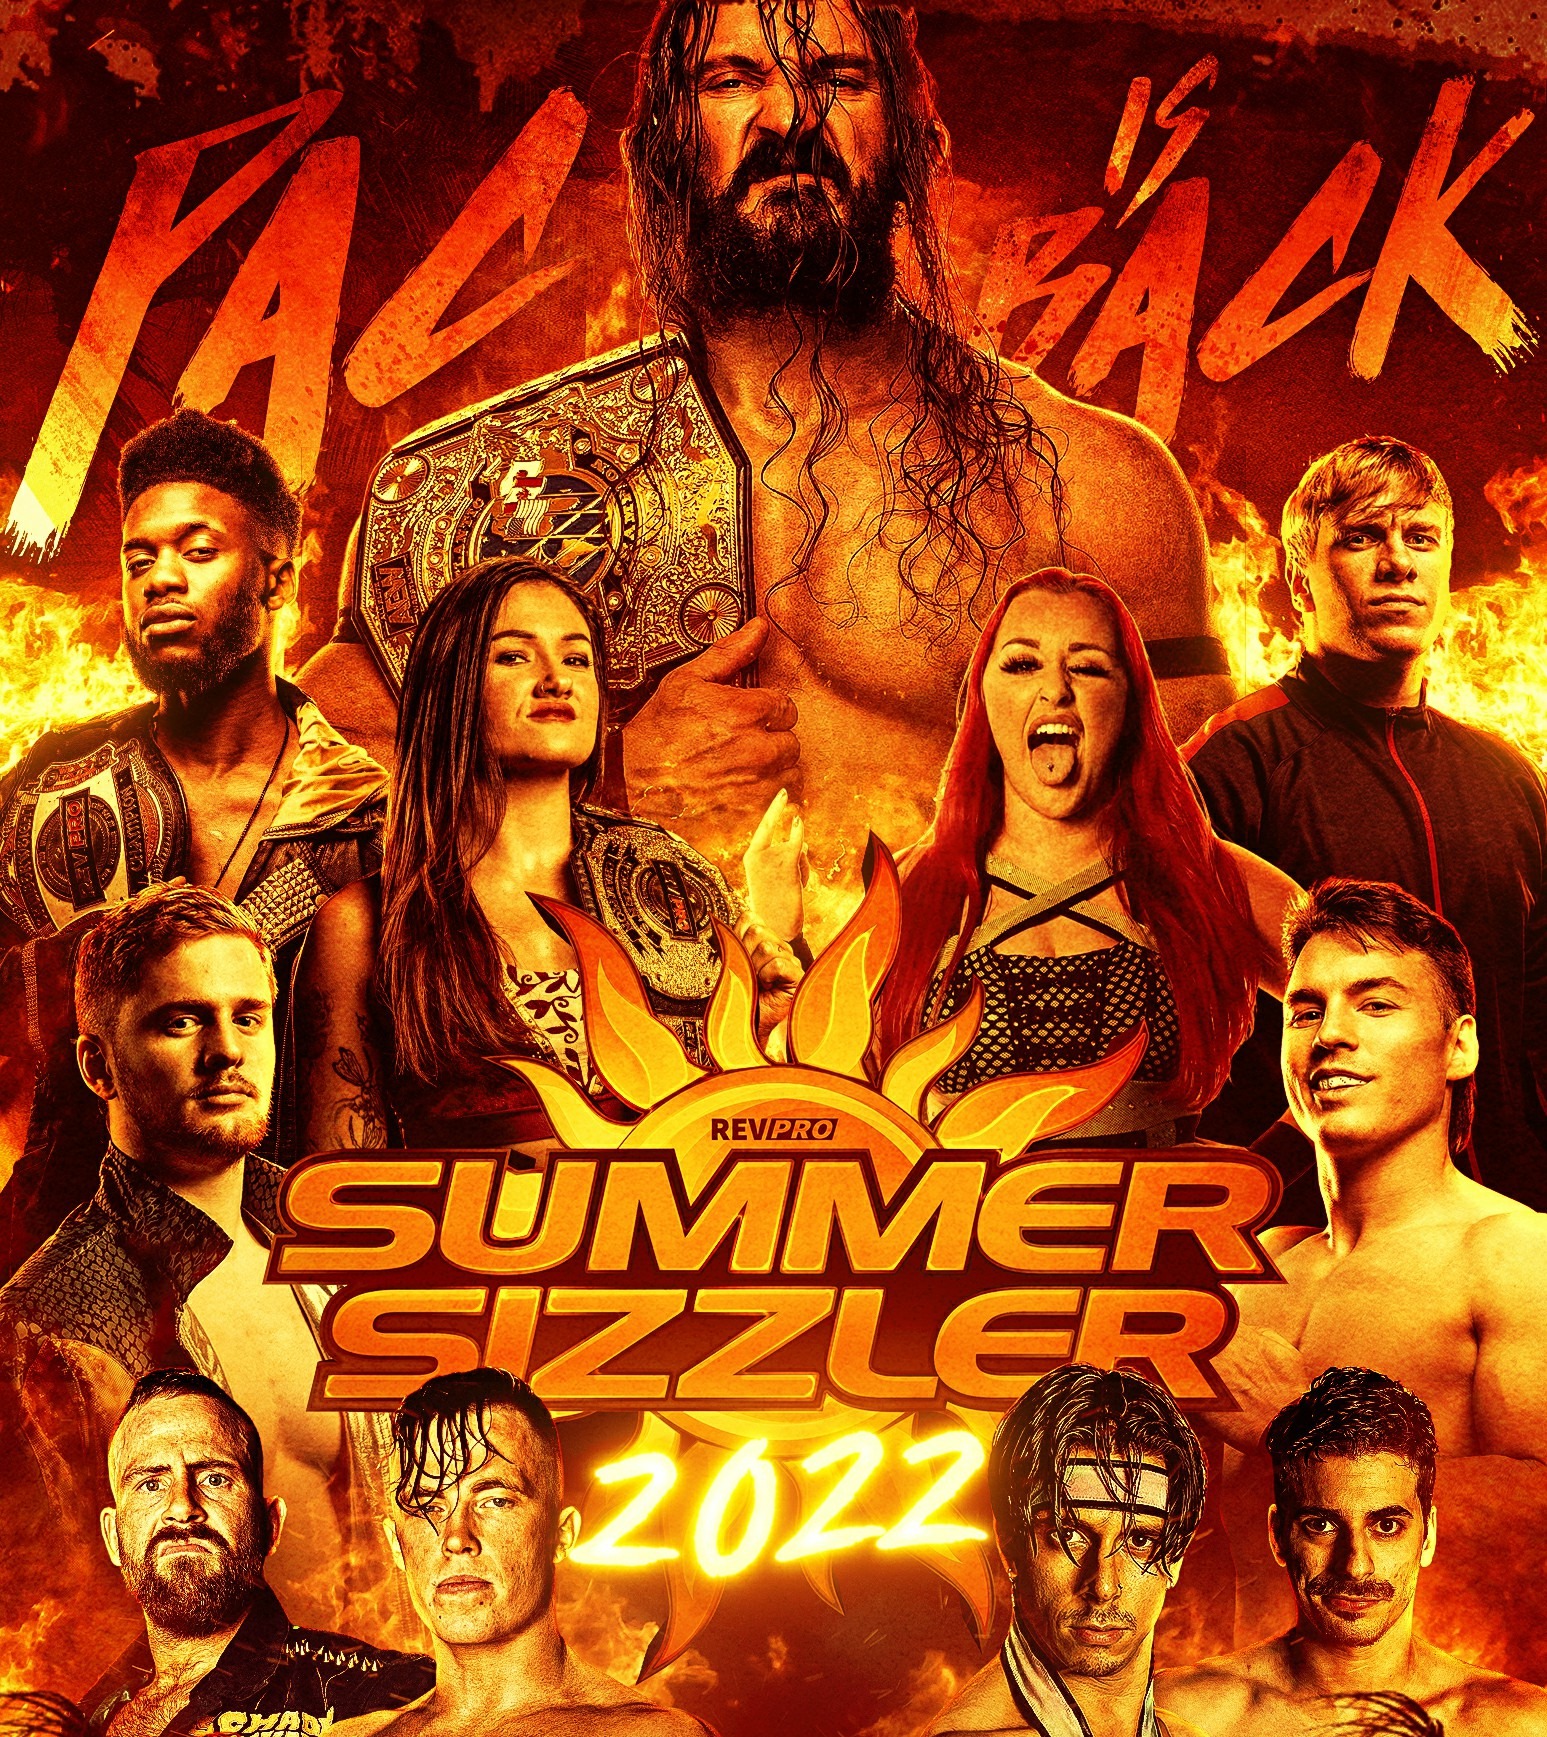 GCP Goes To: Rev Pro Summer Sizzler 2022